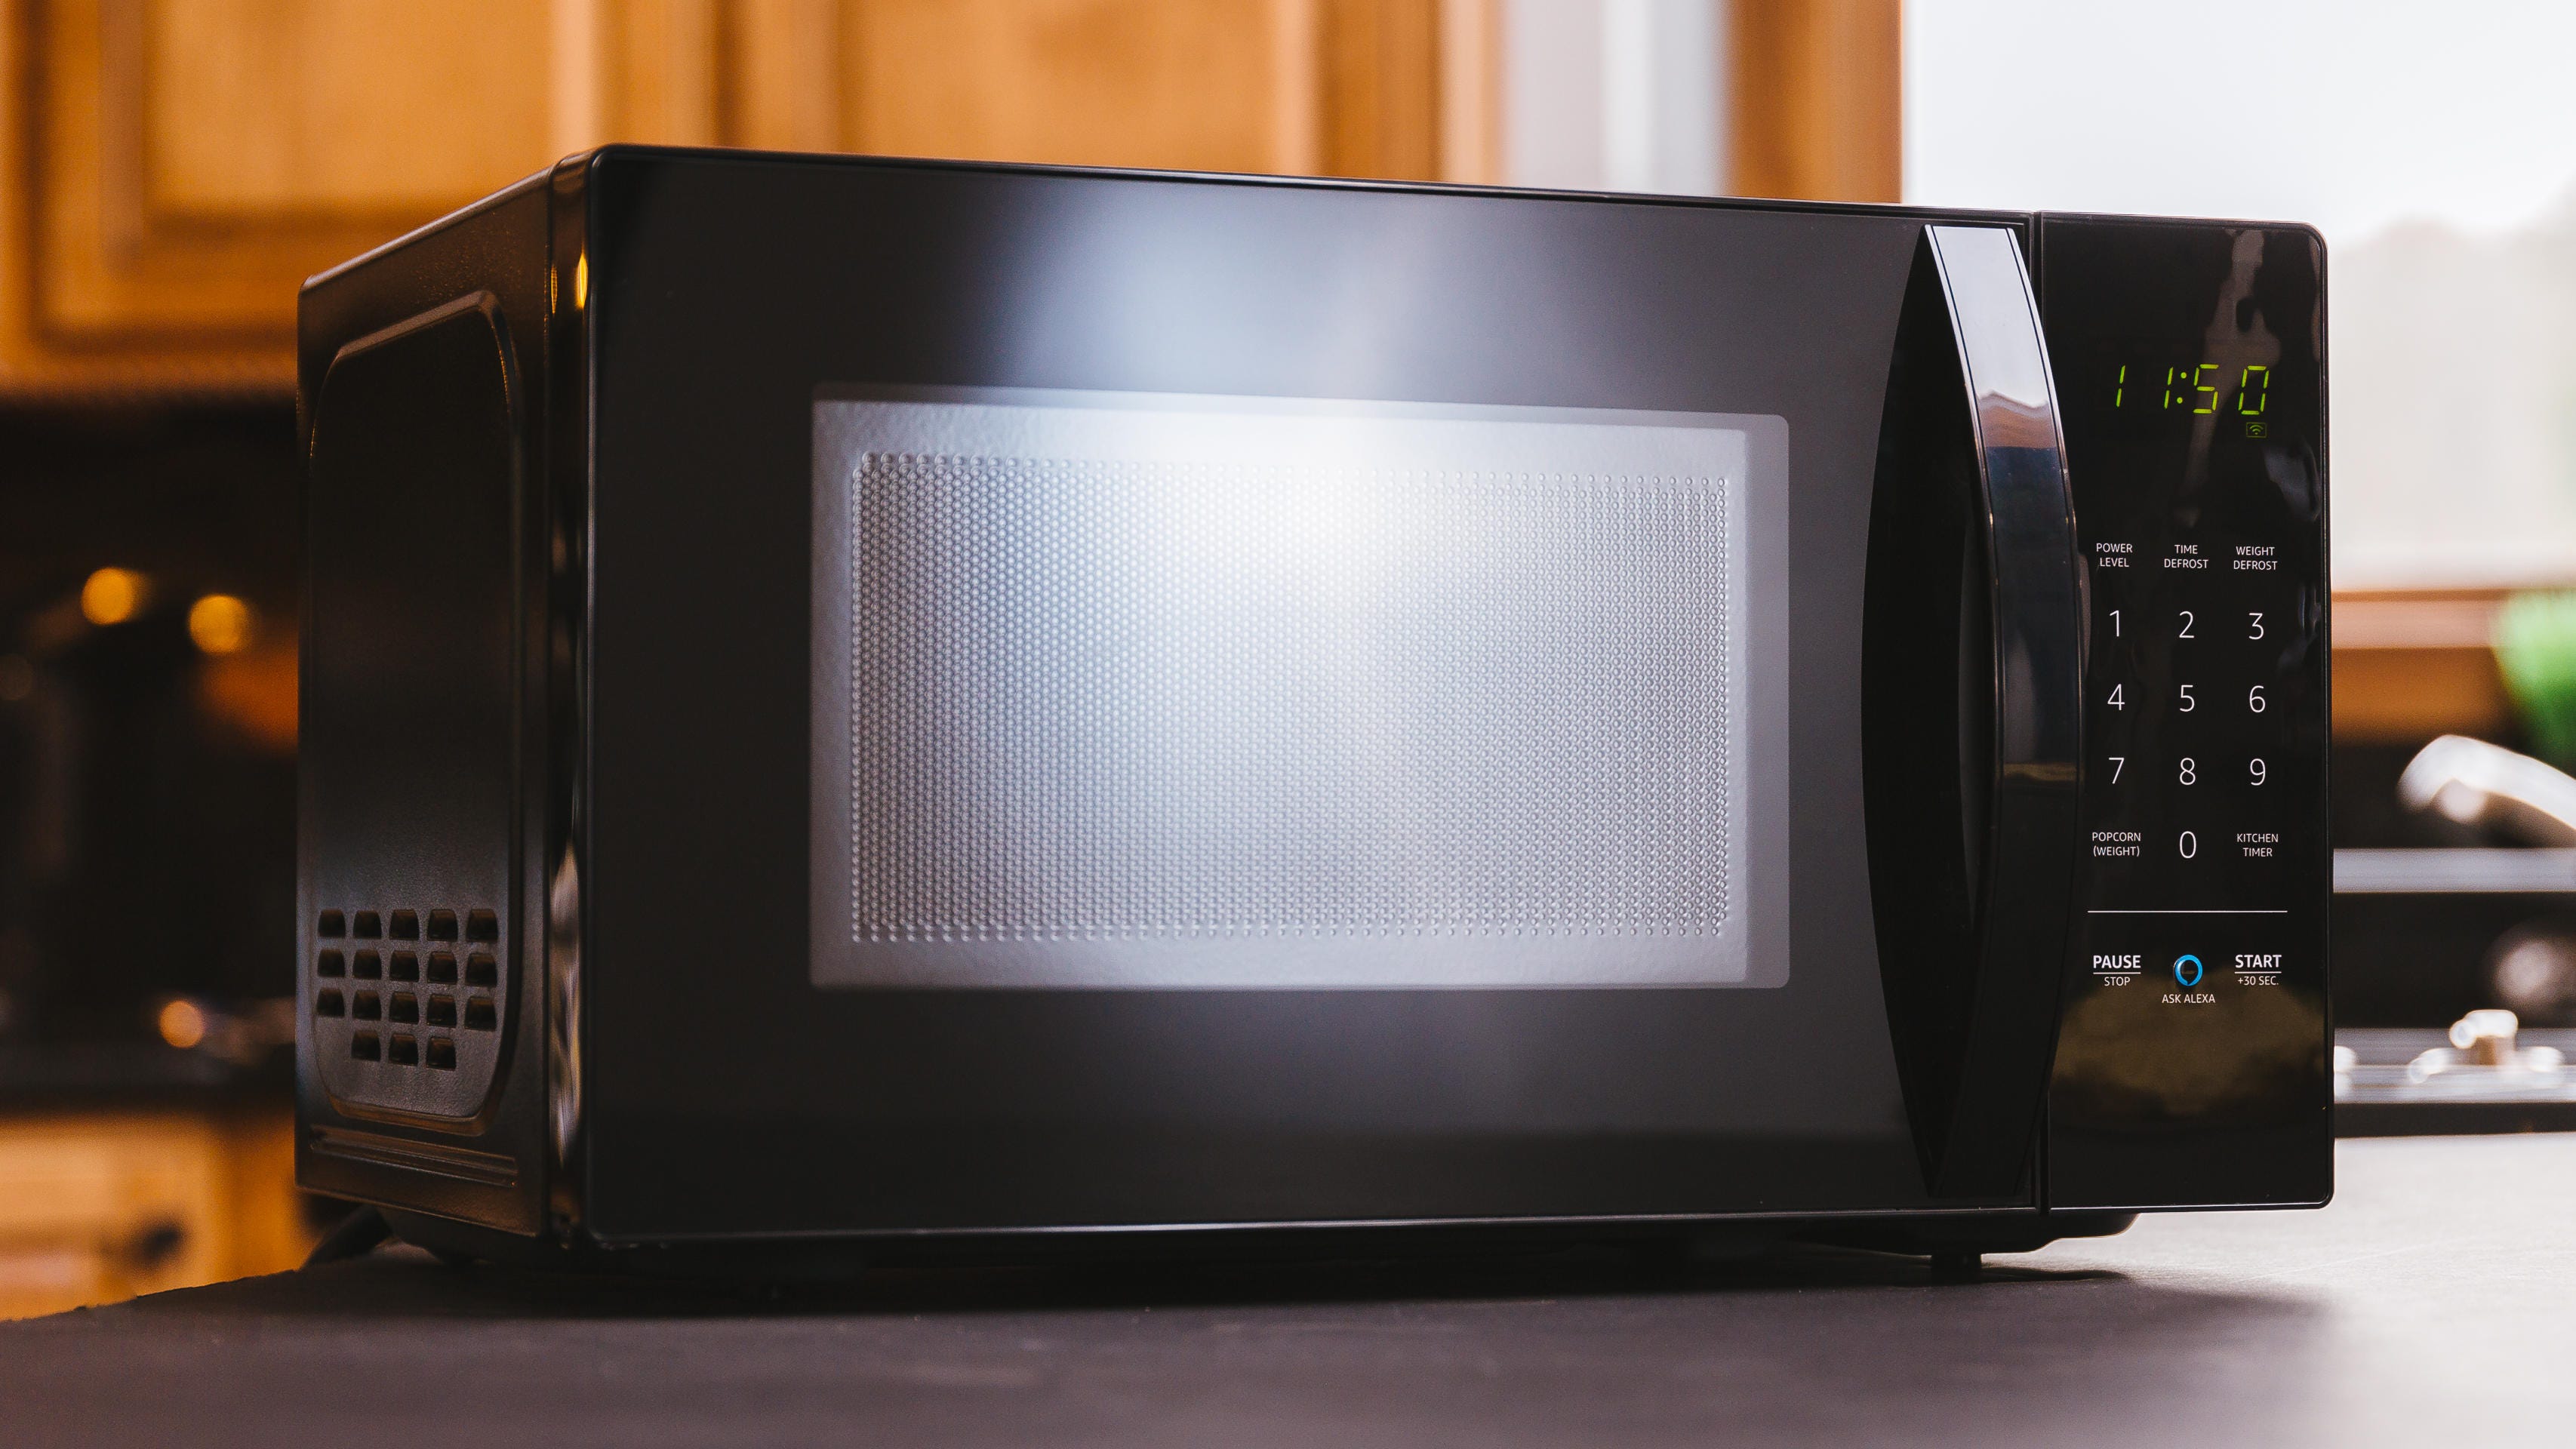 Do Ovens Watts More To Use Than Other Appliances